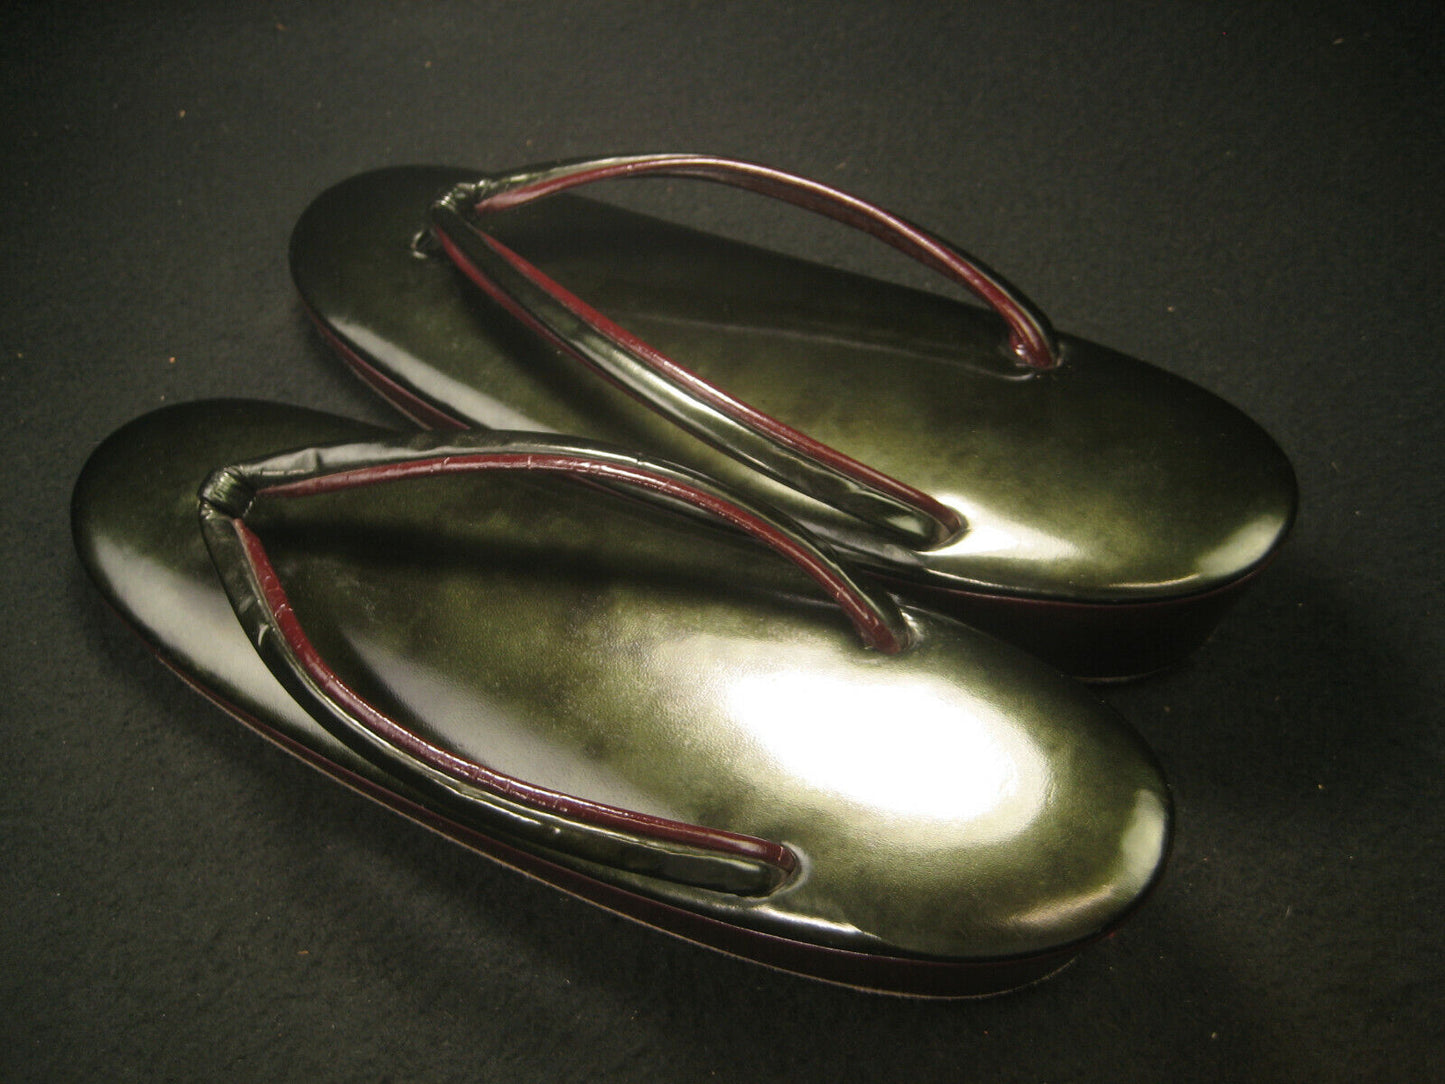 Vintage Japanese Geta Sandals Green & Red Plastic Extra Small Narrow